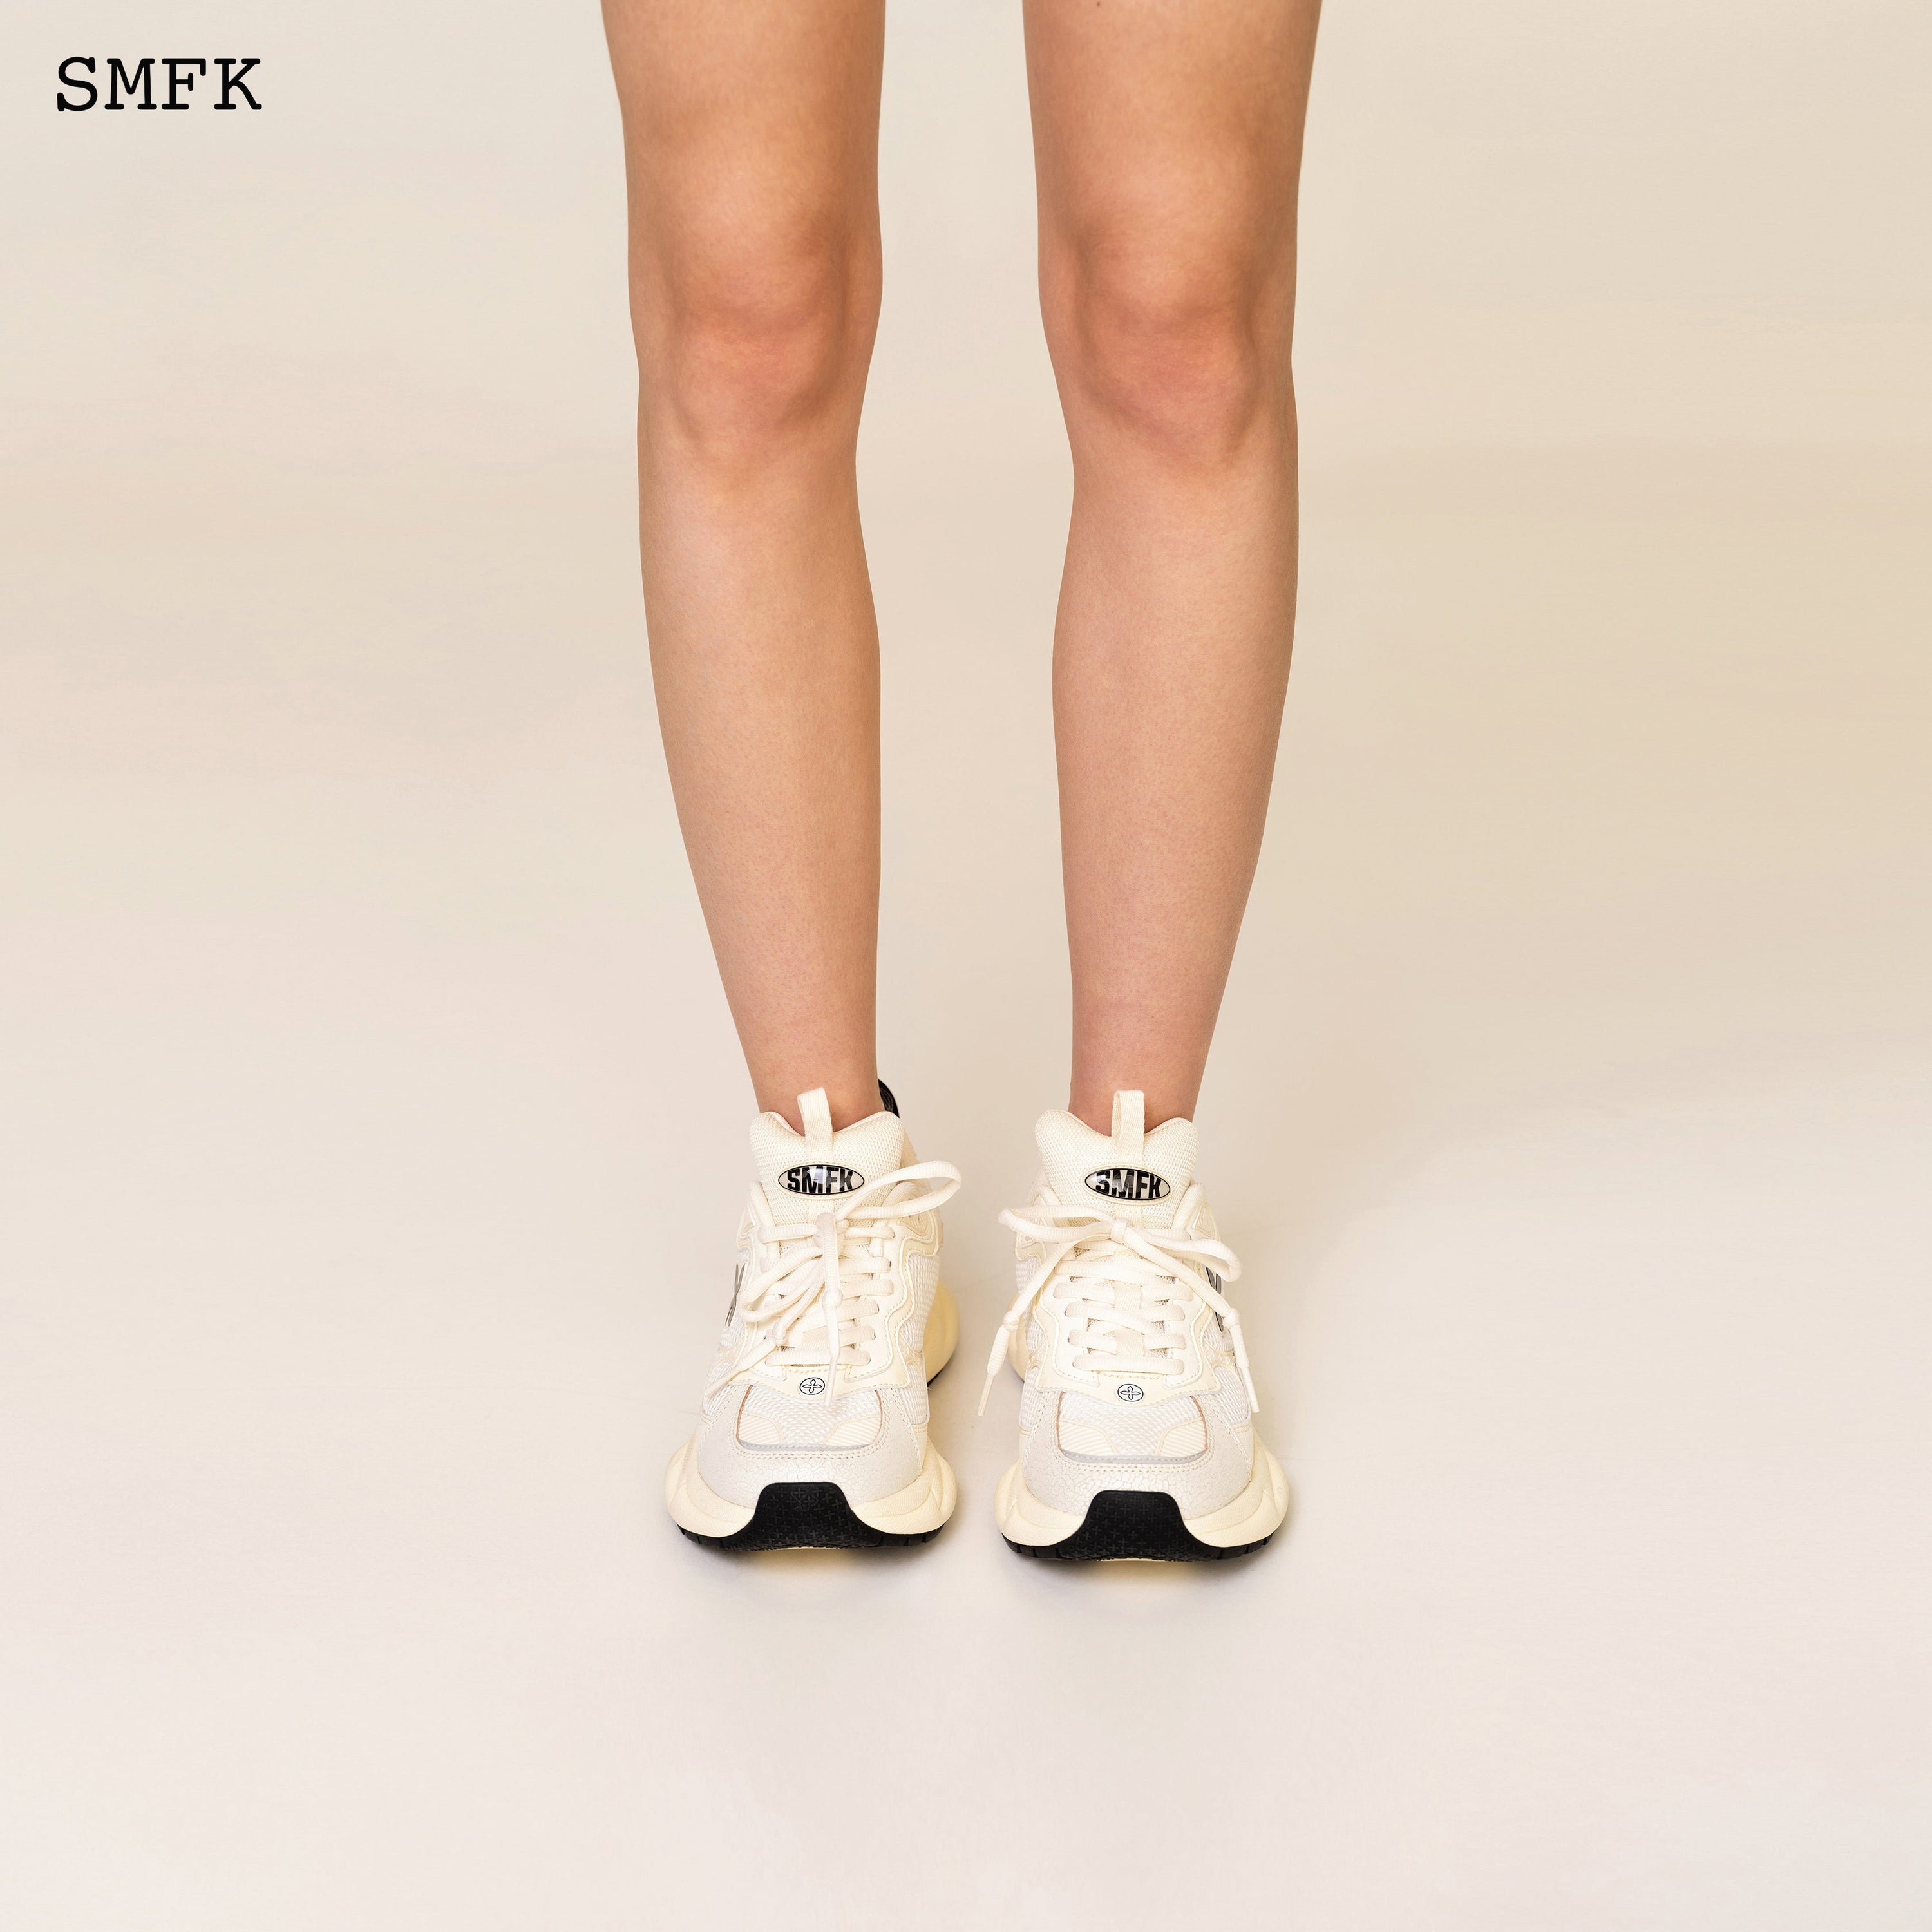 Compass Wave Retro Jogging Shoes In White - SMFK Official